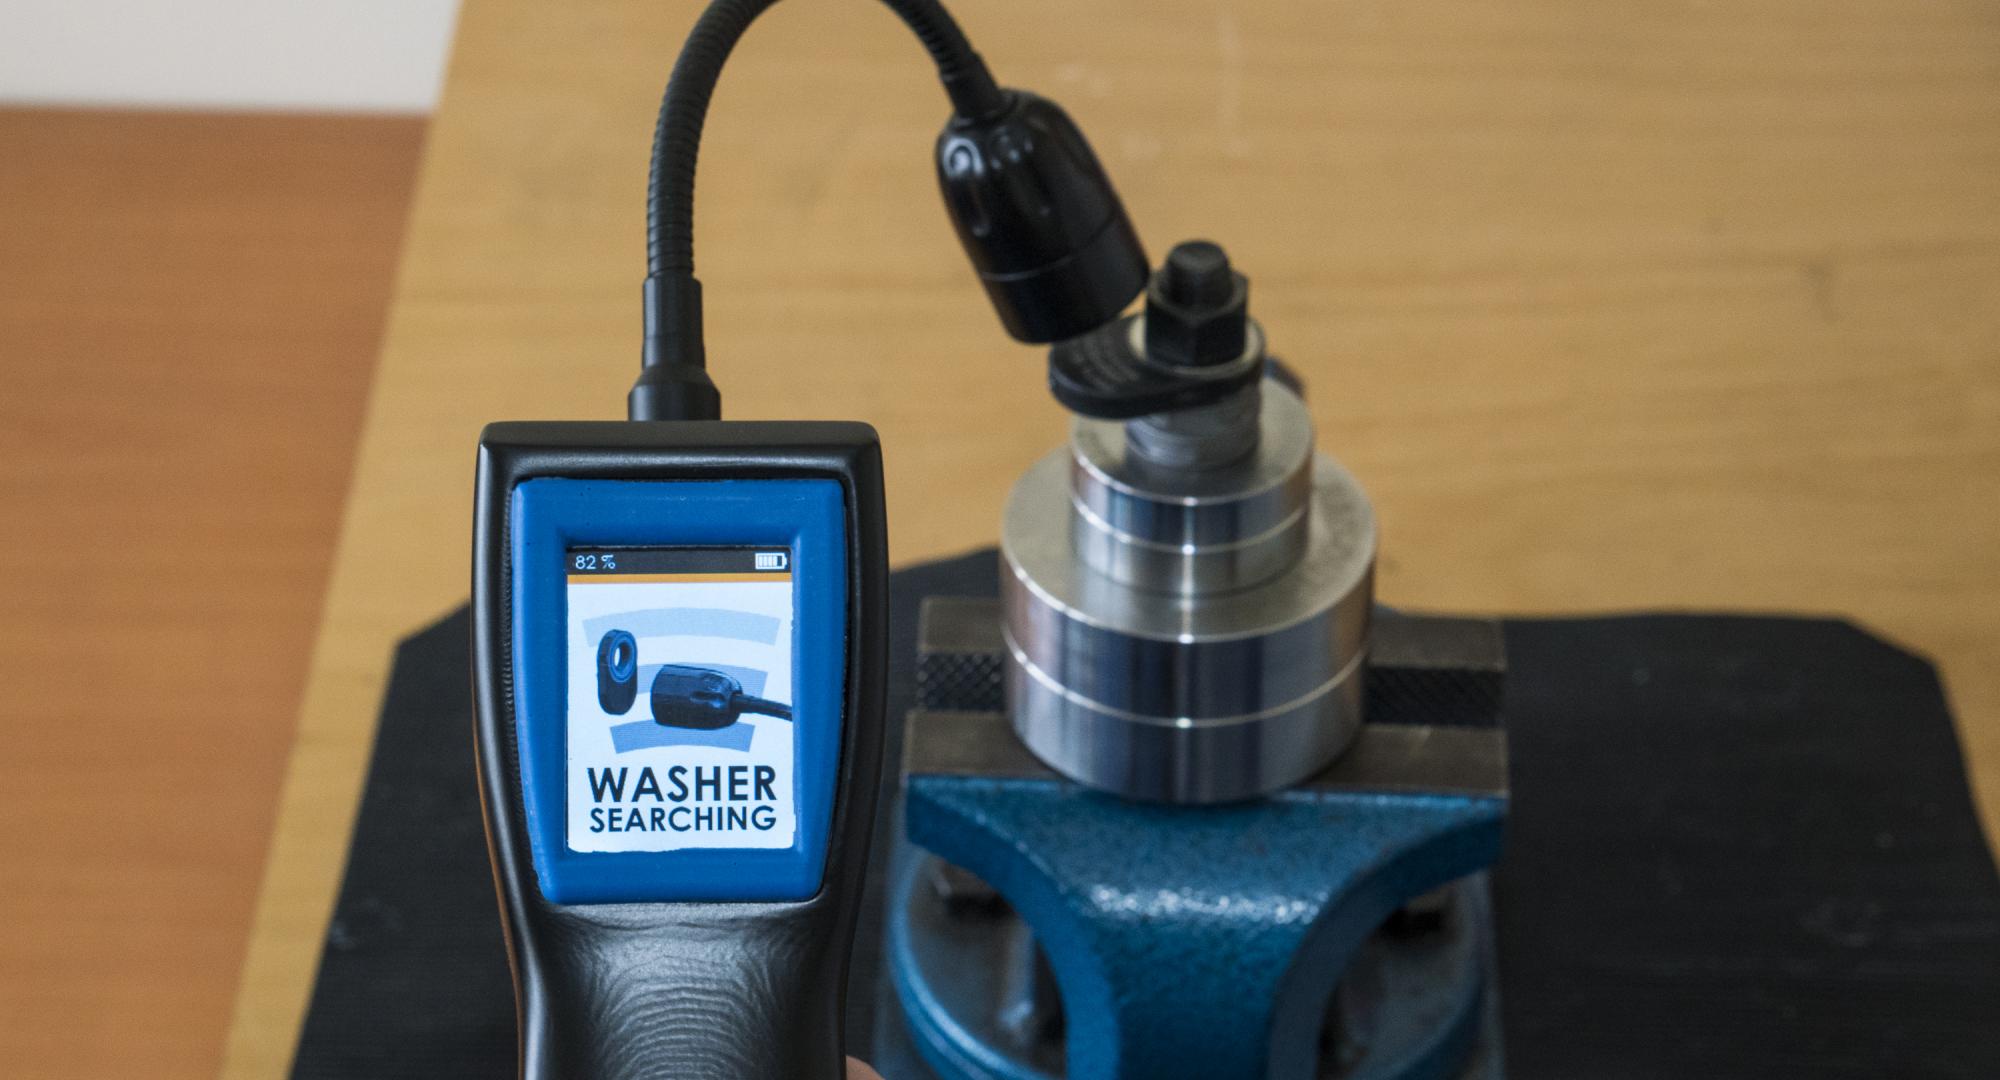 Smart washer enables touchless and wireless measurement of bolt axial load 